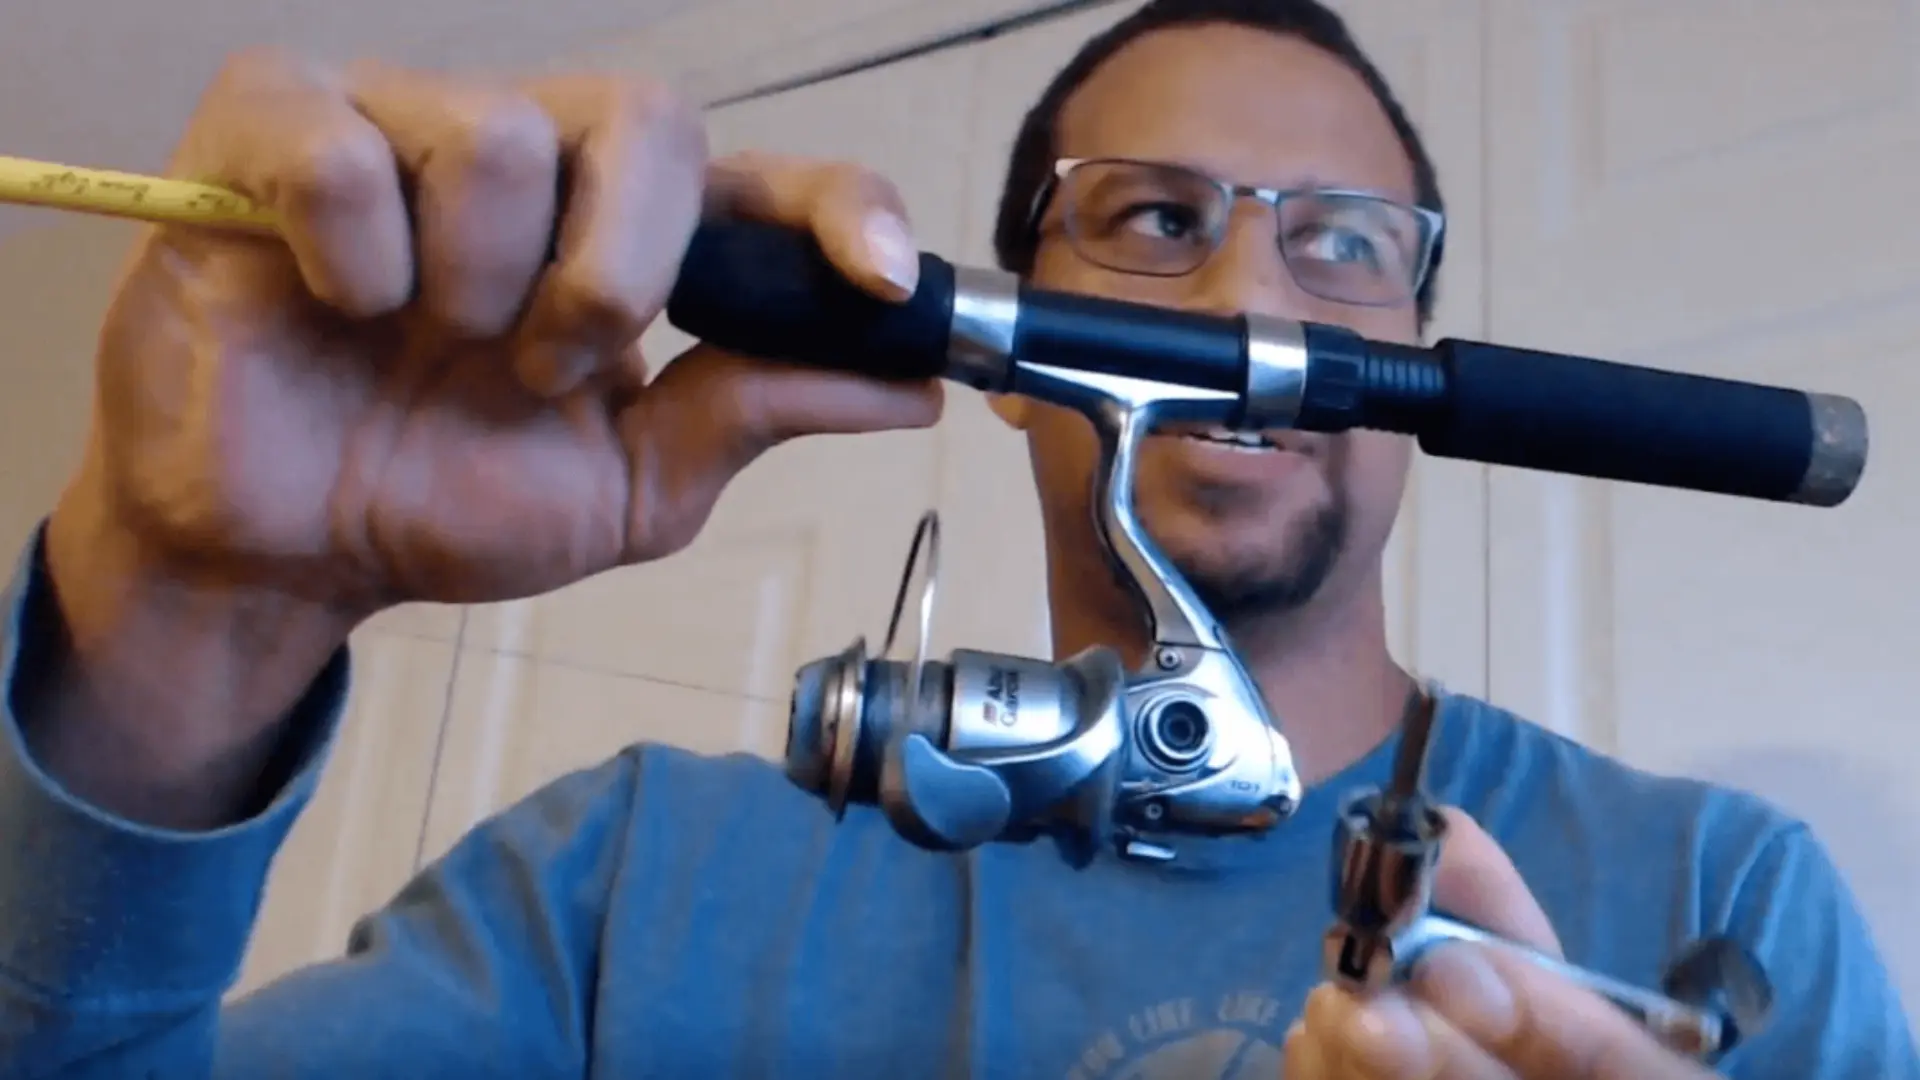 How to Change the Reel From Right-Handed To Left-Handed